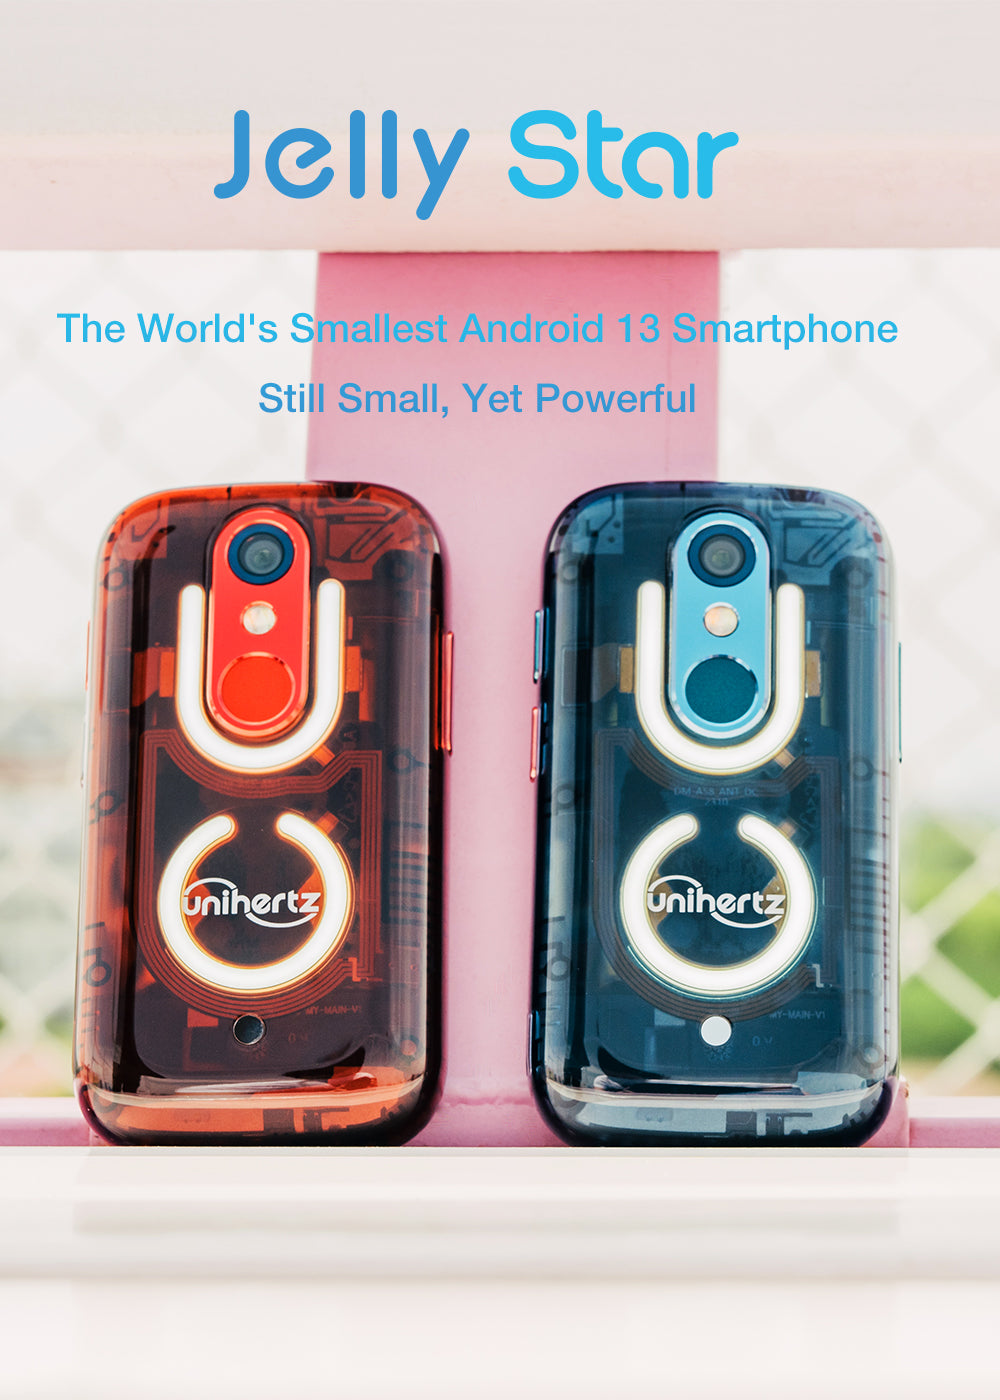 Jelly Star -  The World's Smallest Android 13 Smartphone Banner